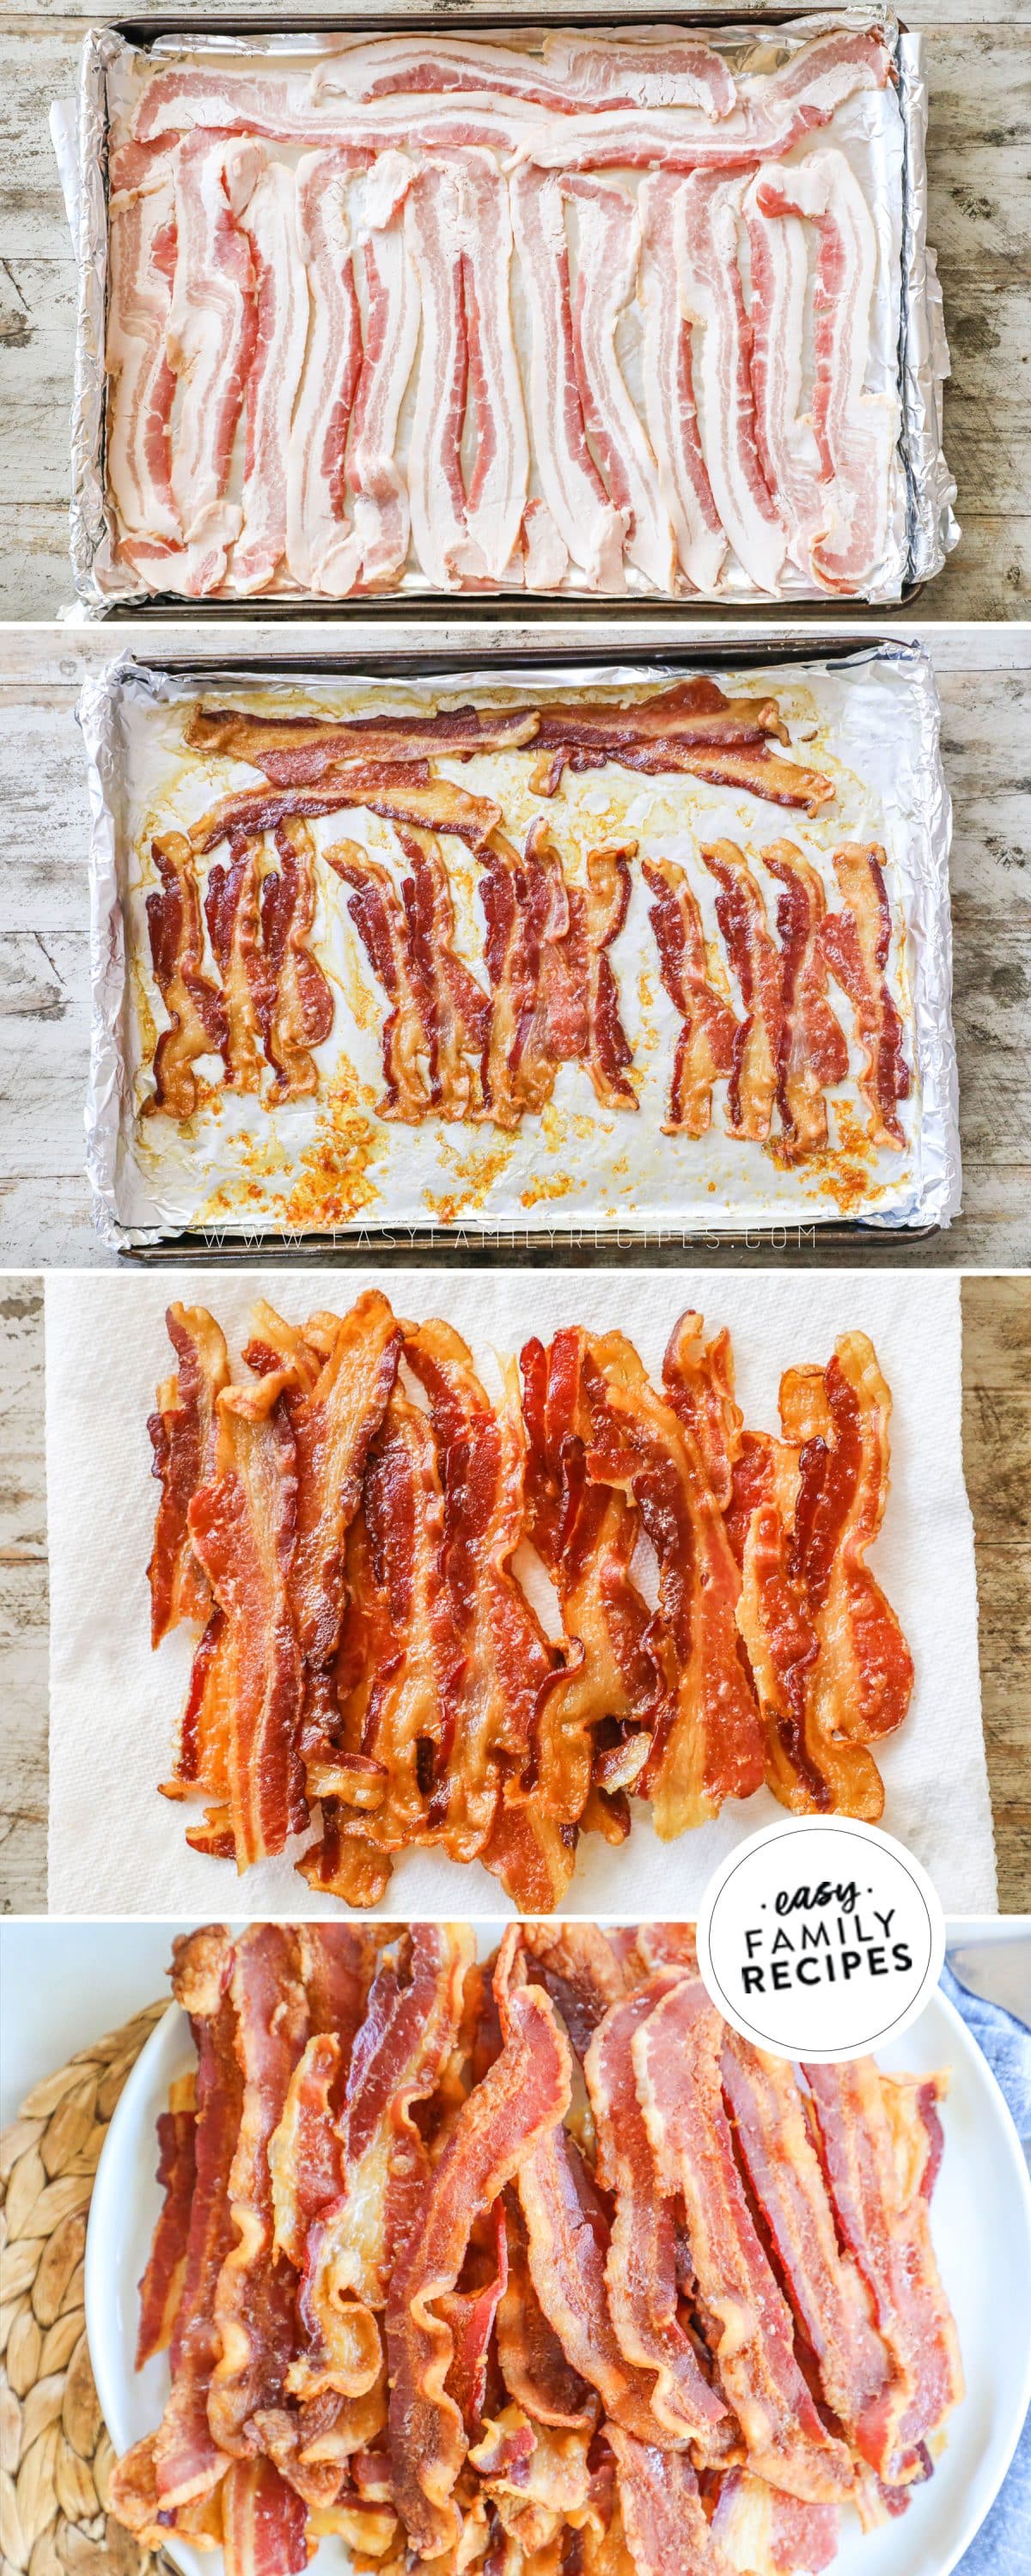 https://easyfamilyrecipes.com/wp-content/uploads/2023/02/How-to-Cook-Bacon-in-the-Oven.jpg